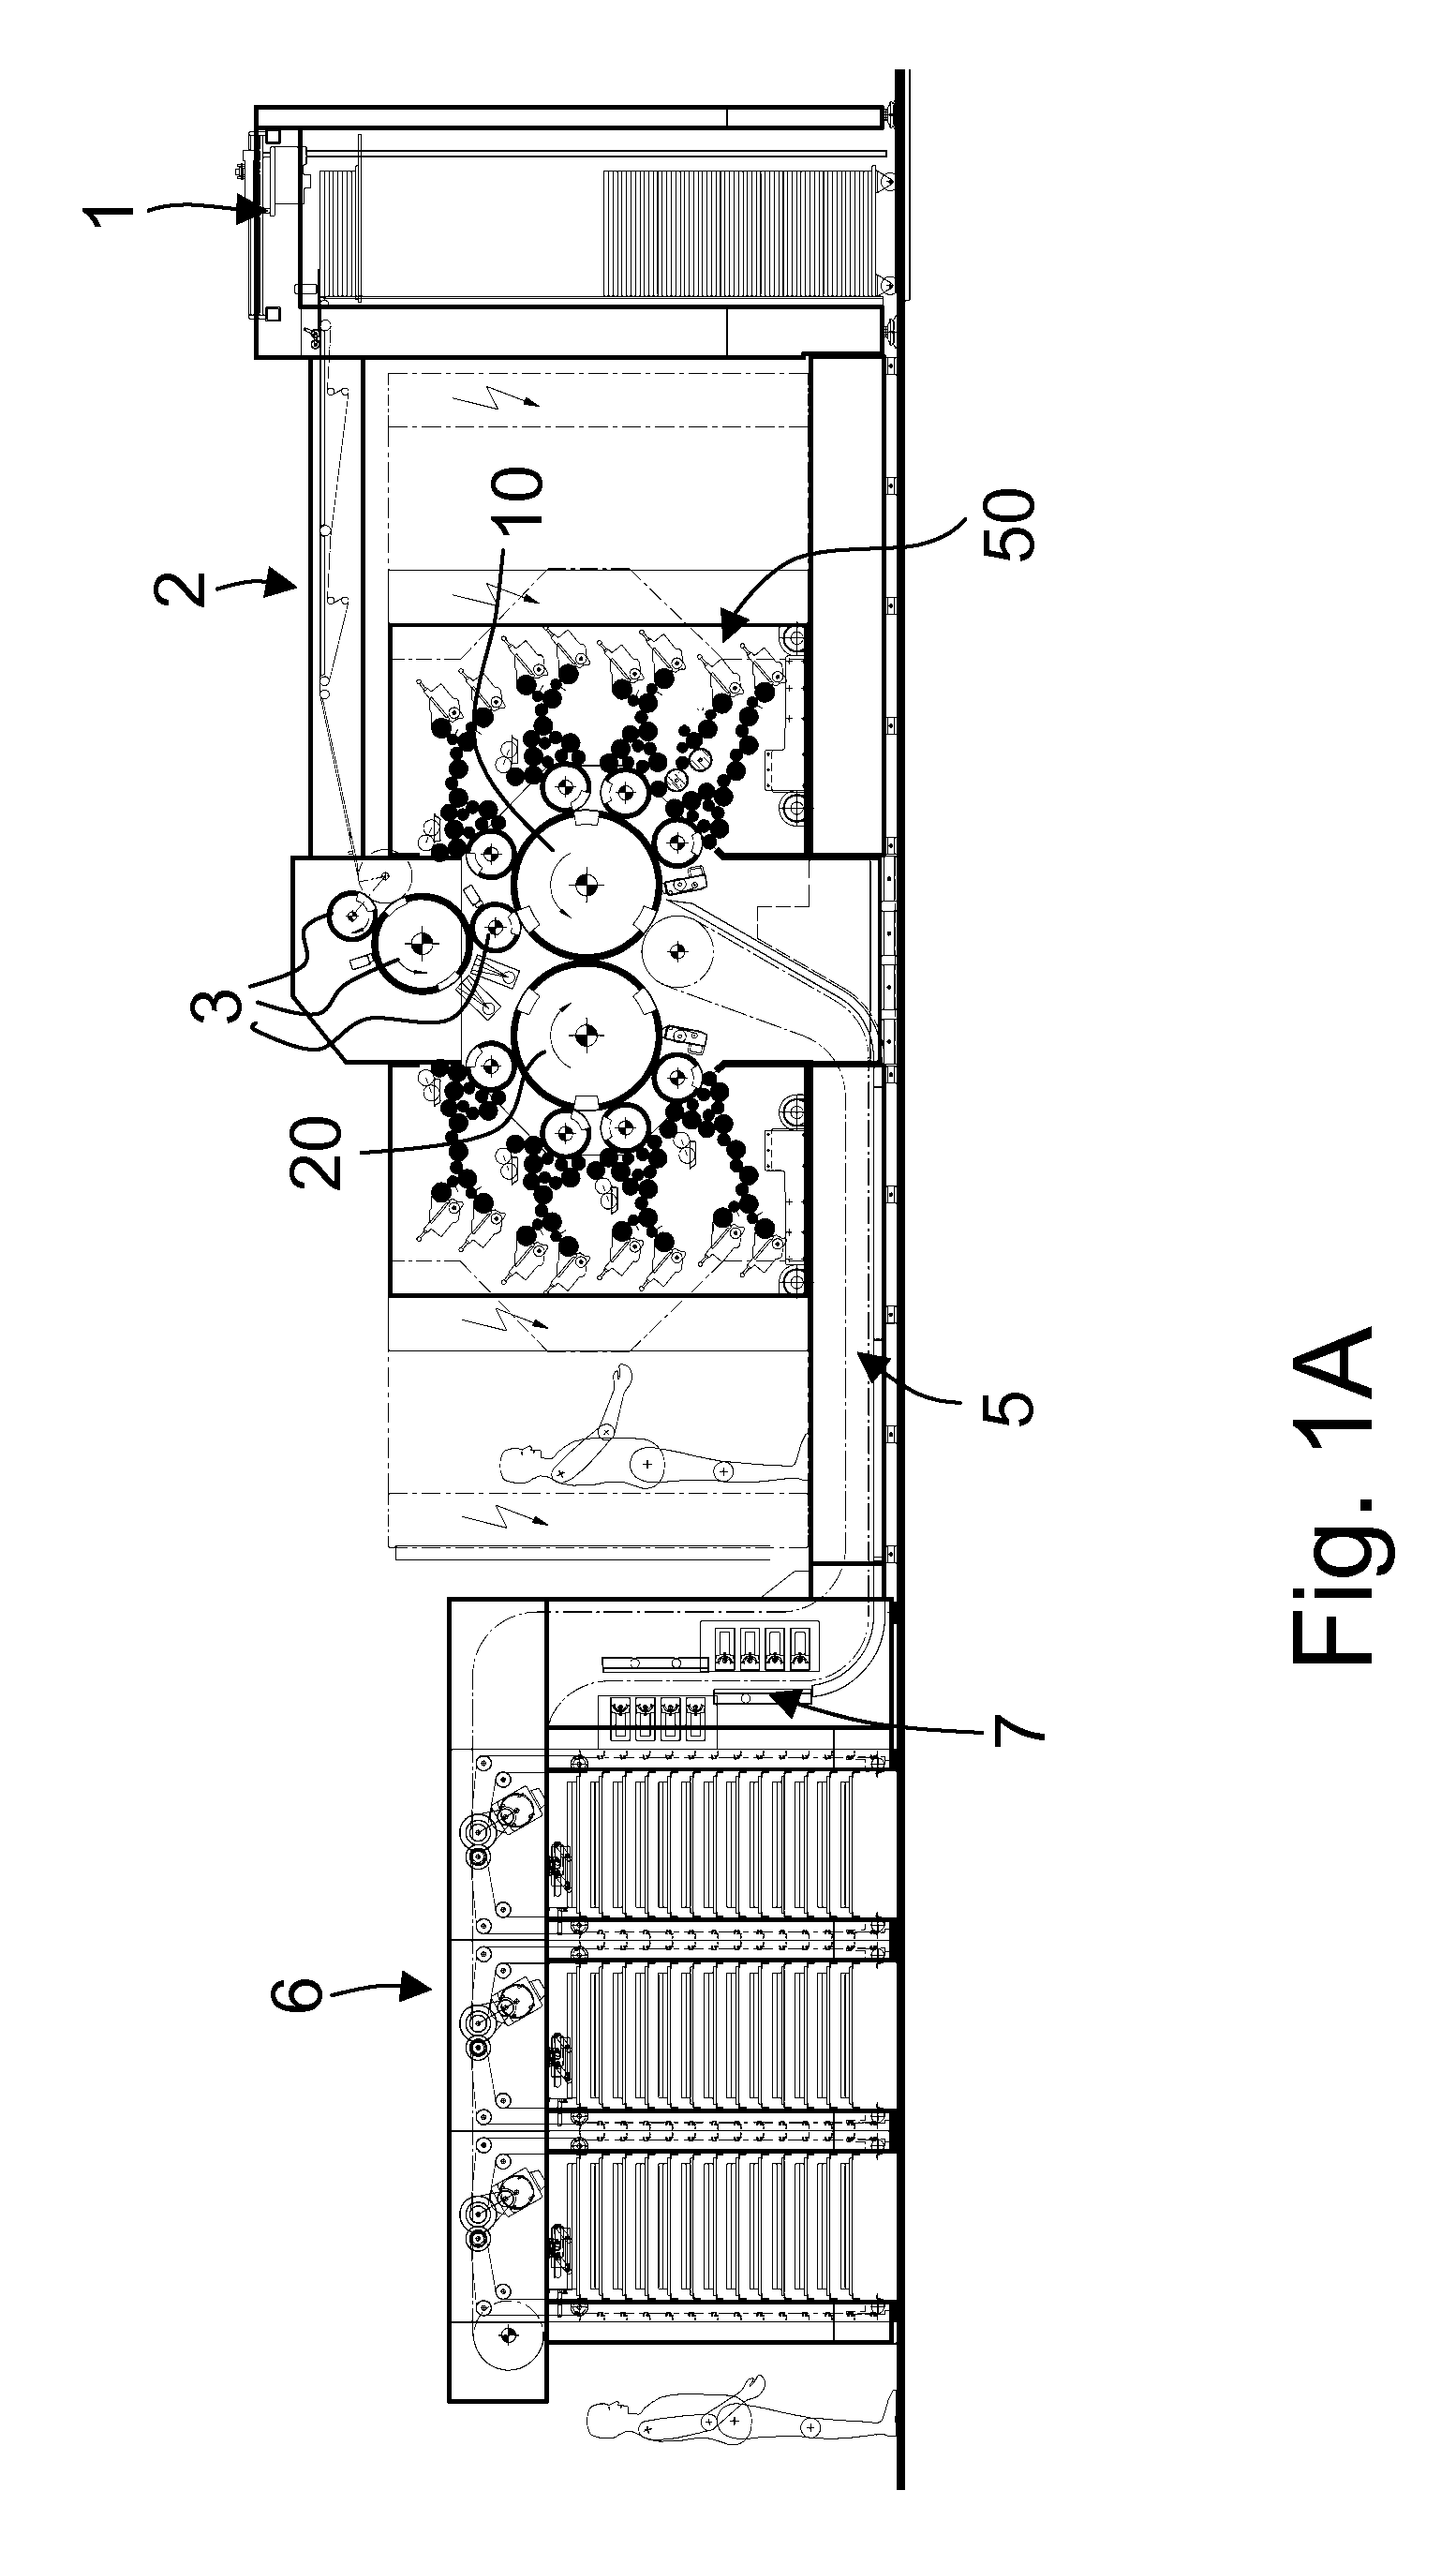 Method and apparatus for forming an ink pattern exhibiting a two-dimensional ink gradient